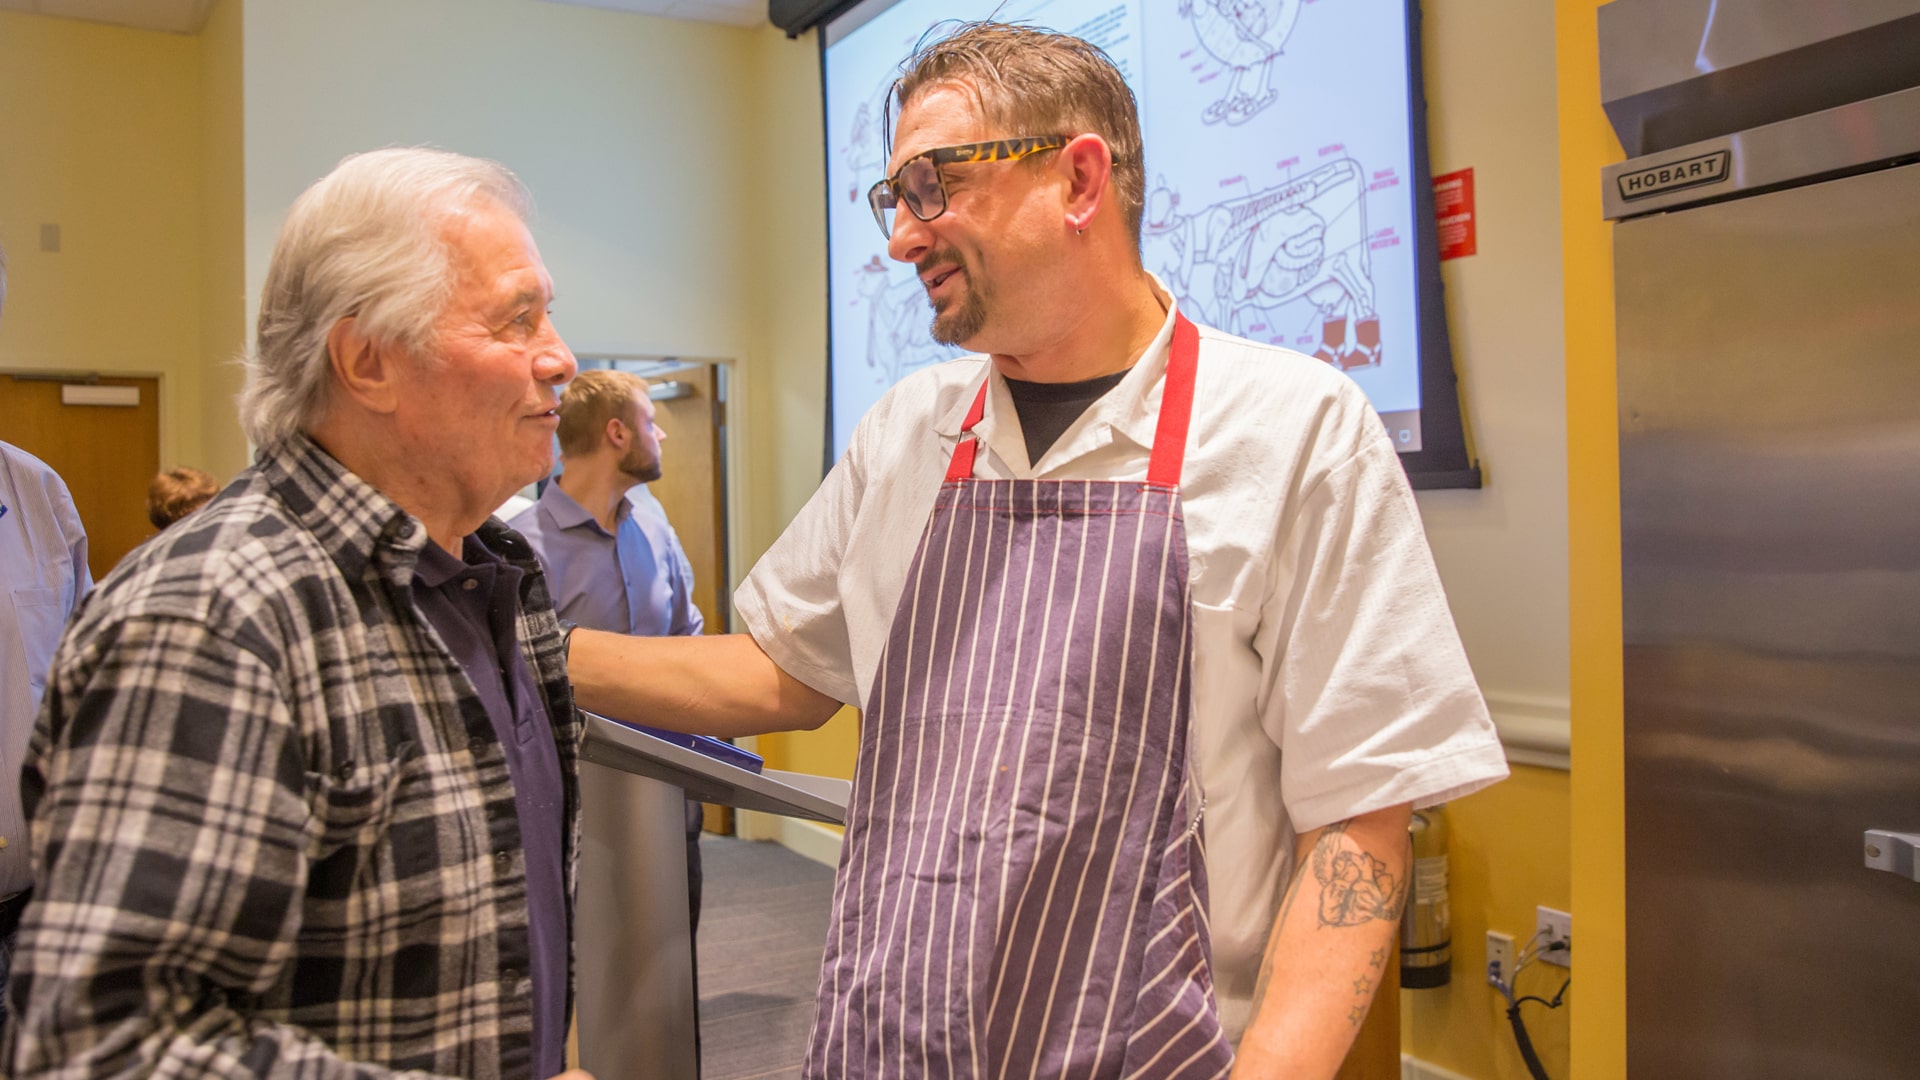 Jacques Pépin and Chris Cosentino